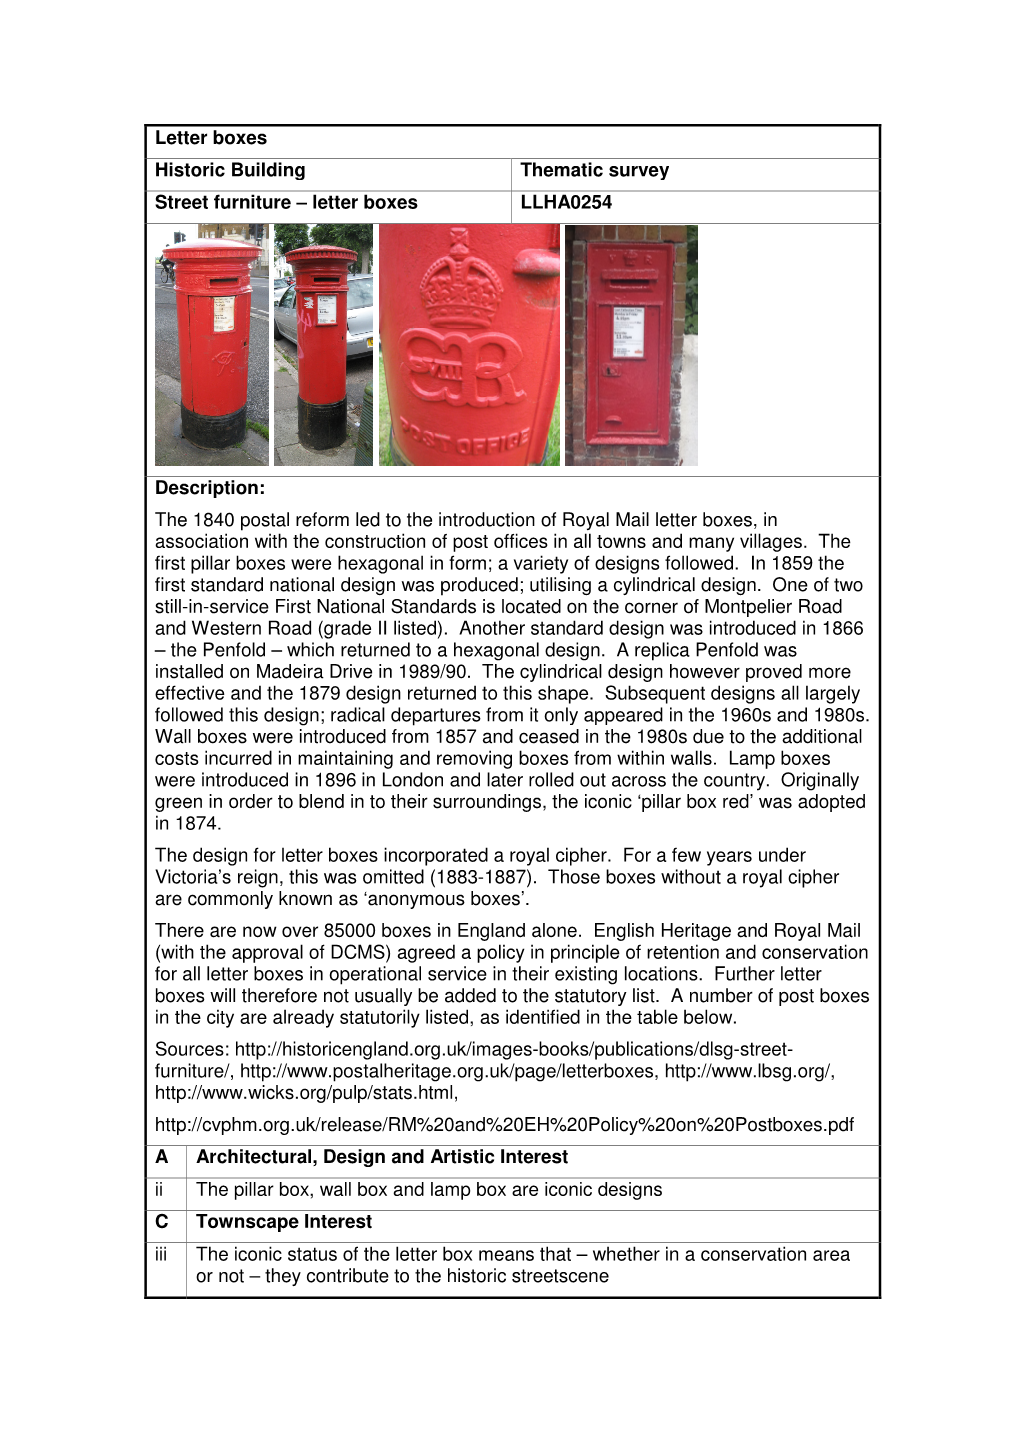 Letter Boxes Historic Building Thematic Survey Street Furniture – Letter Boxes LLHA0254